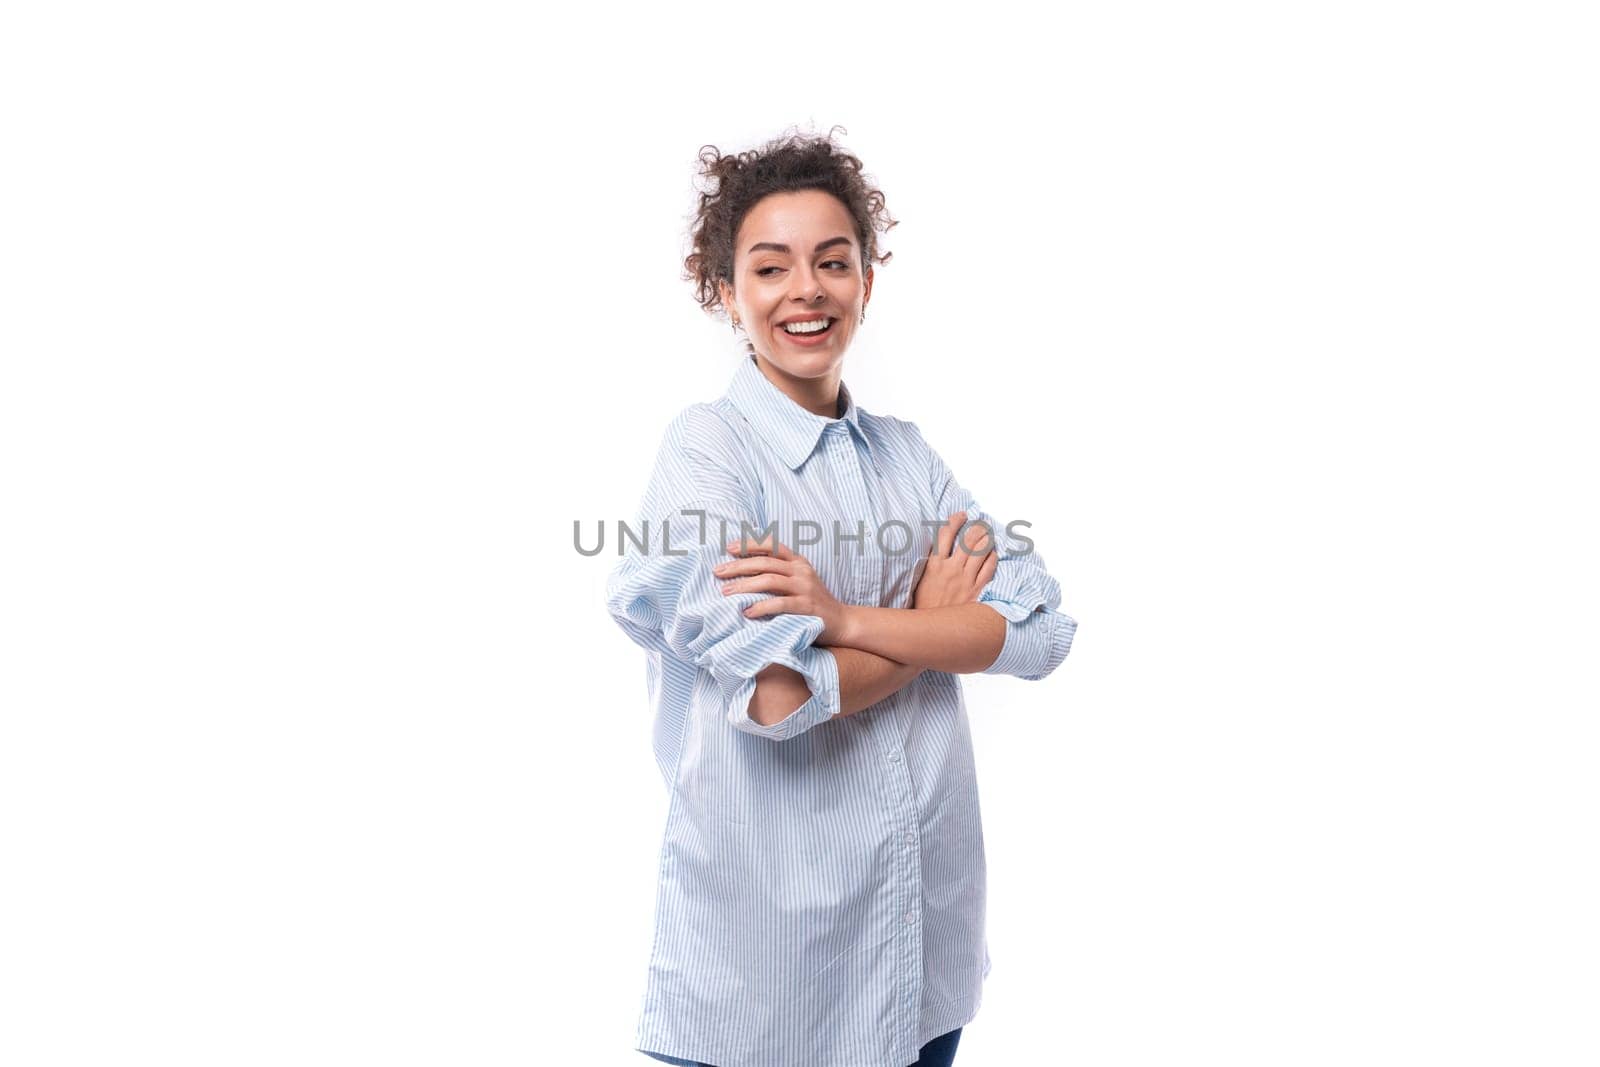 young smiling fashionista caucasian woman with curly black hair in glasses is dressed in a blue blouse on a white background.